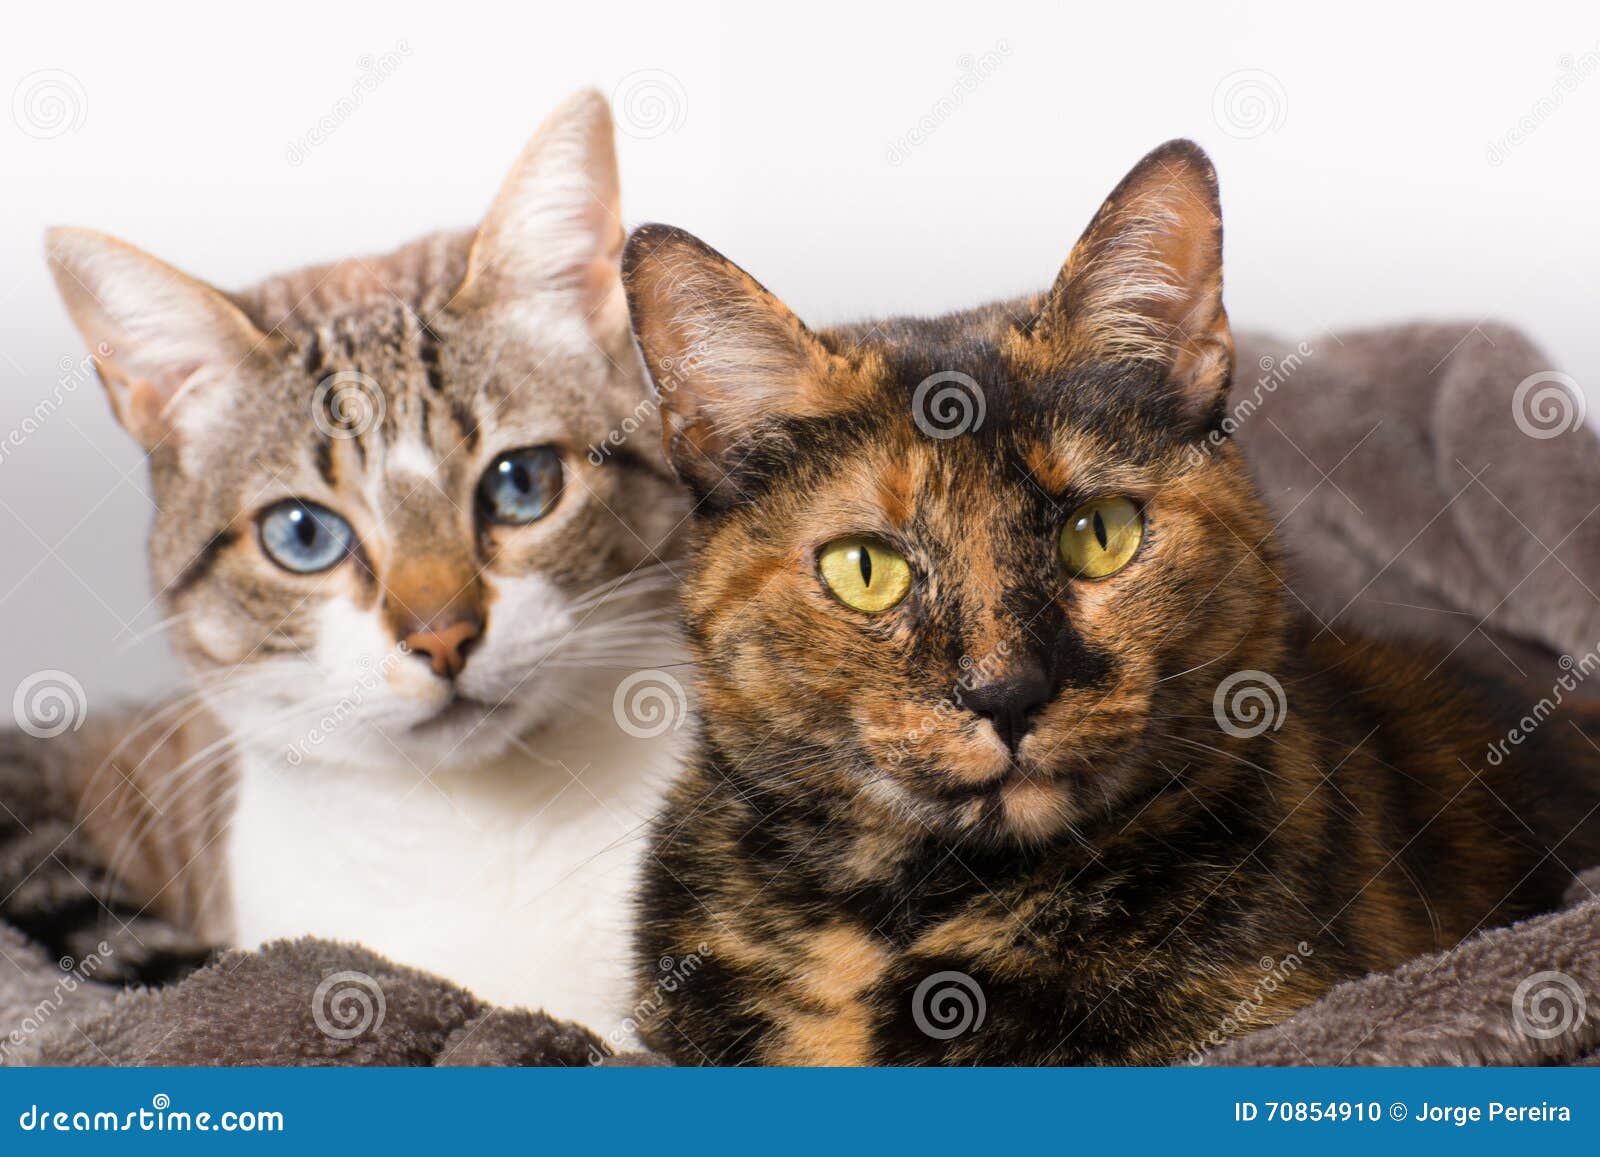 Two cats staring stock photo. Image of animals, feline - 70854910